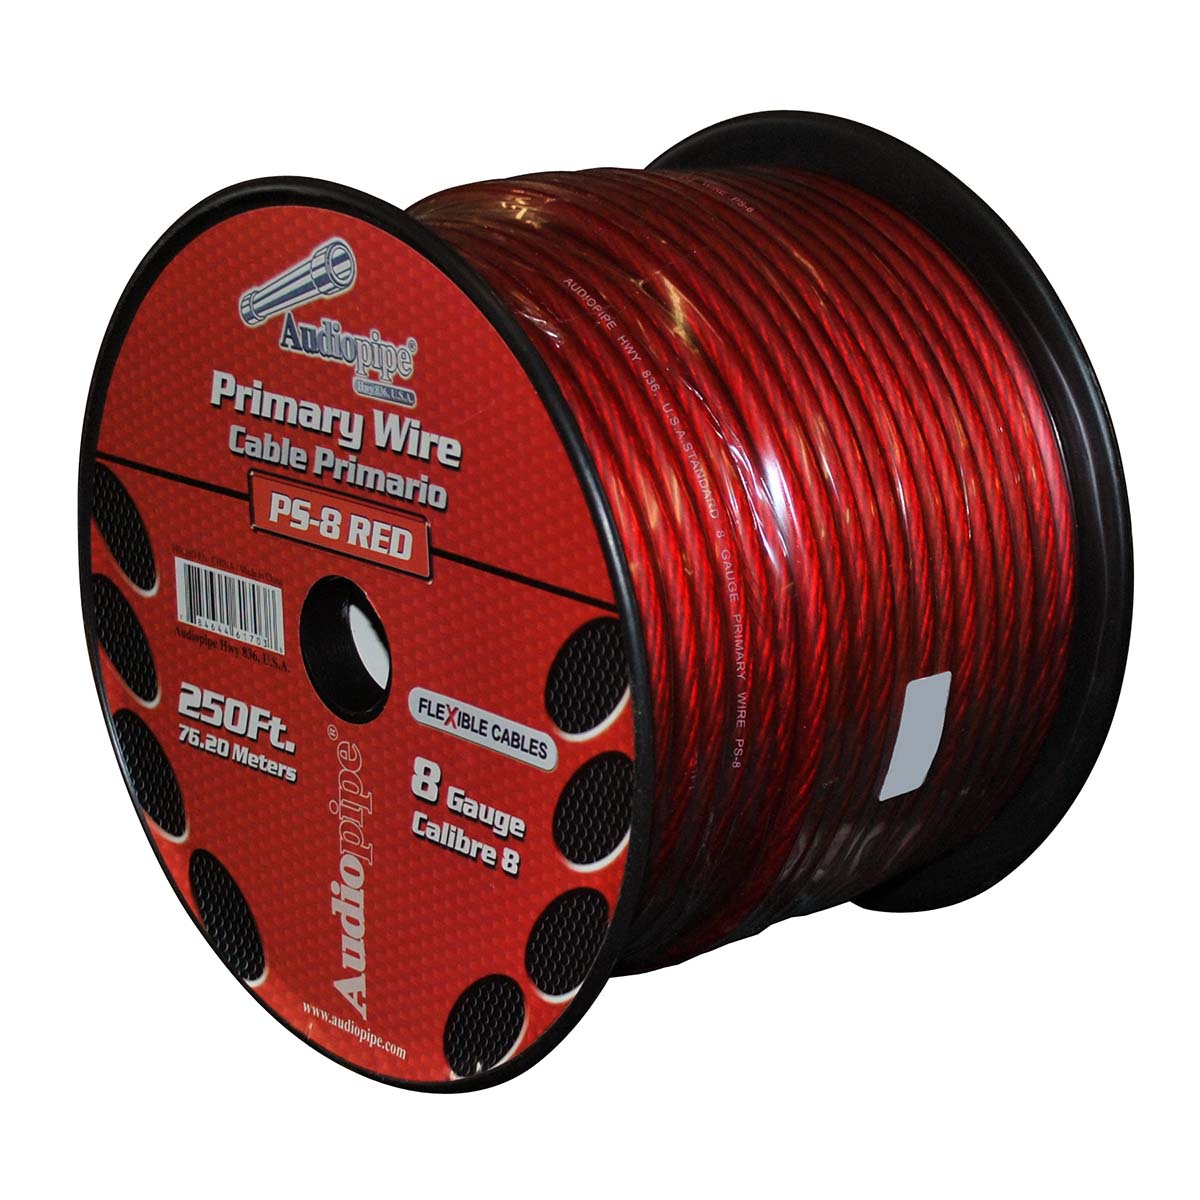 Audiopipe Flexible Power Cable Red 250 Ft.